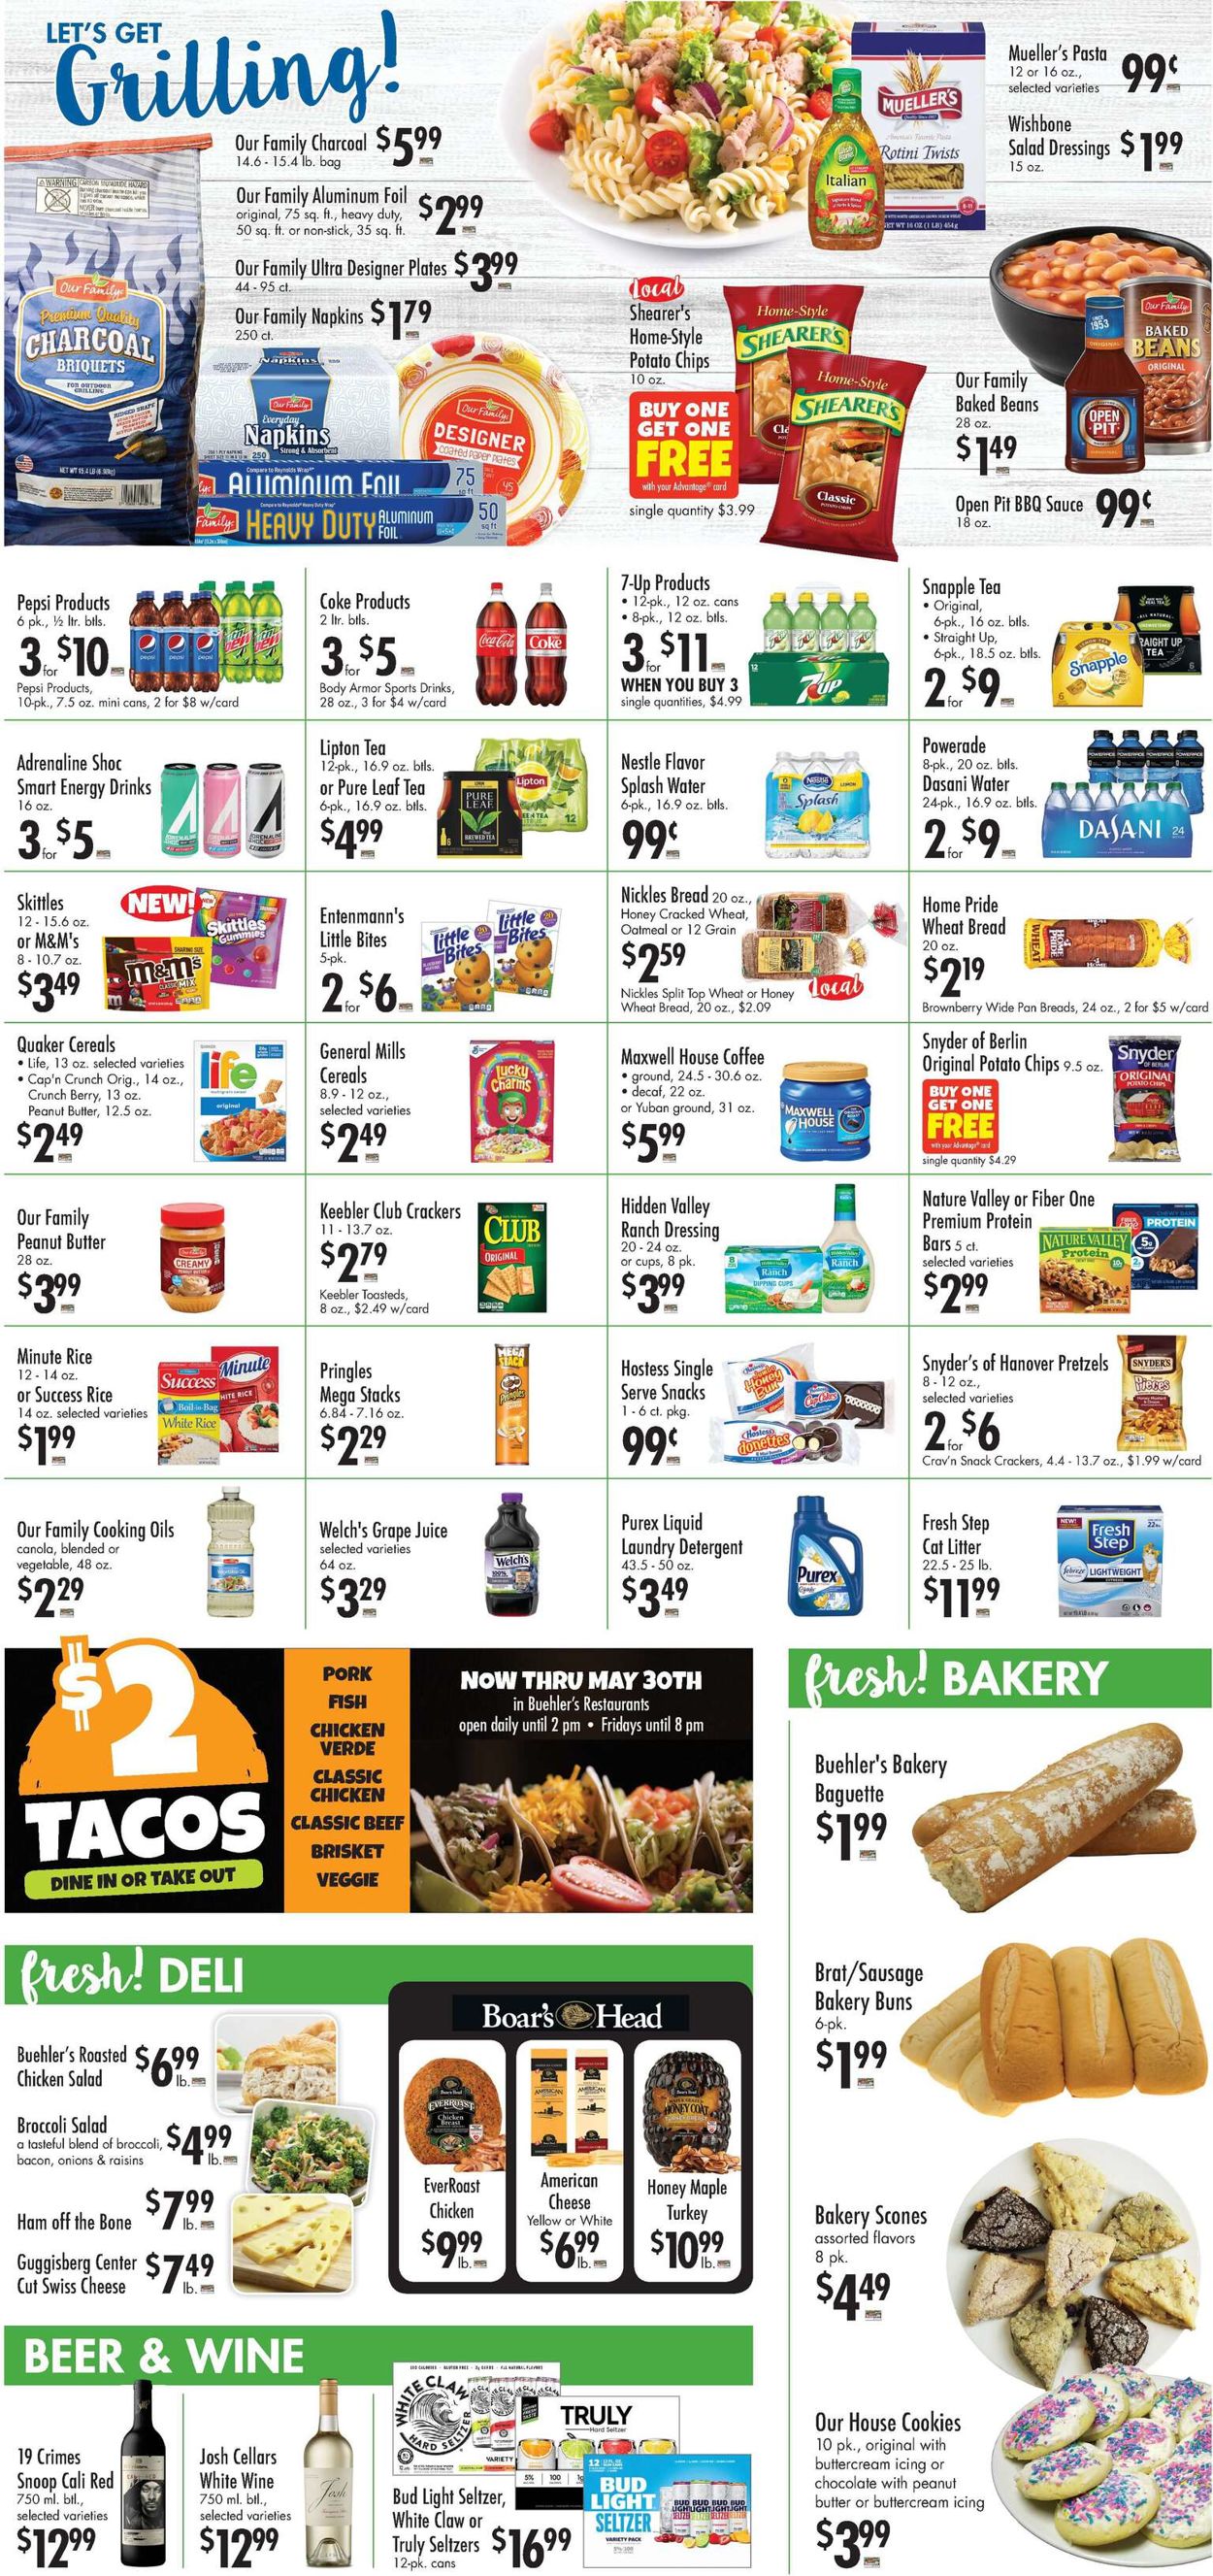 Catalogue Buehler's Fresh Foods from 05/12/2021